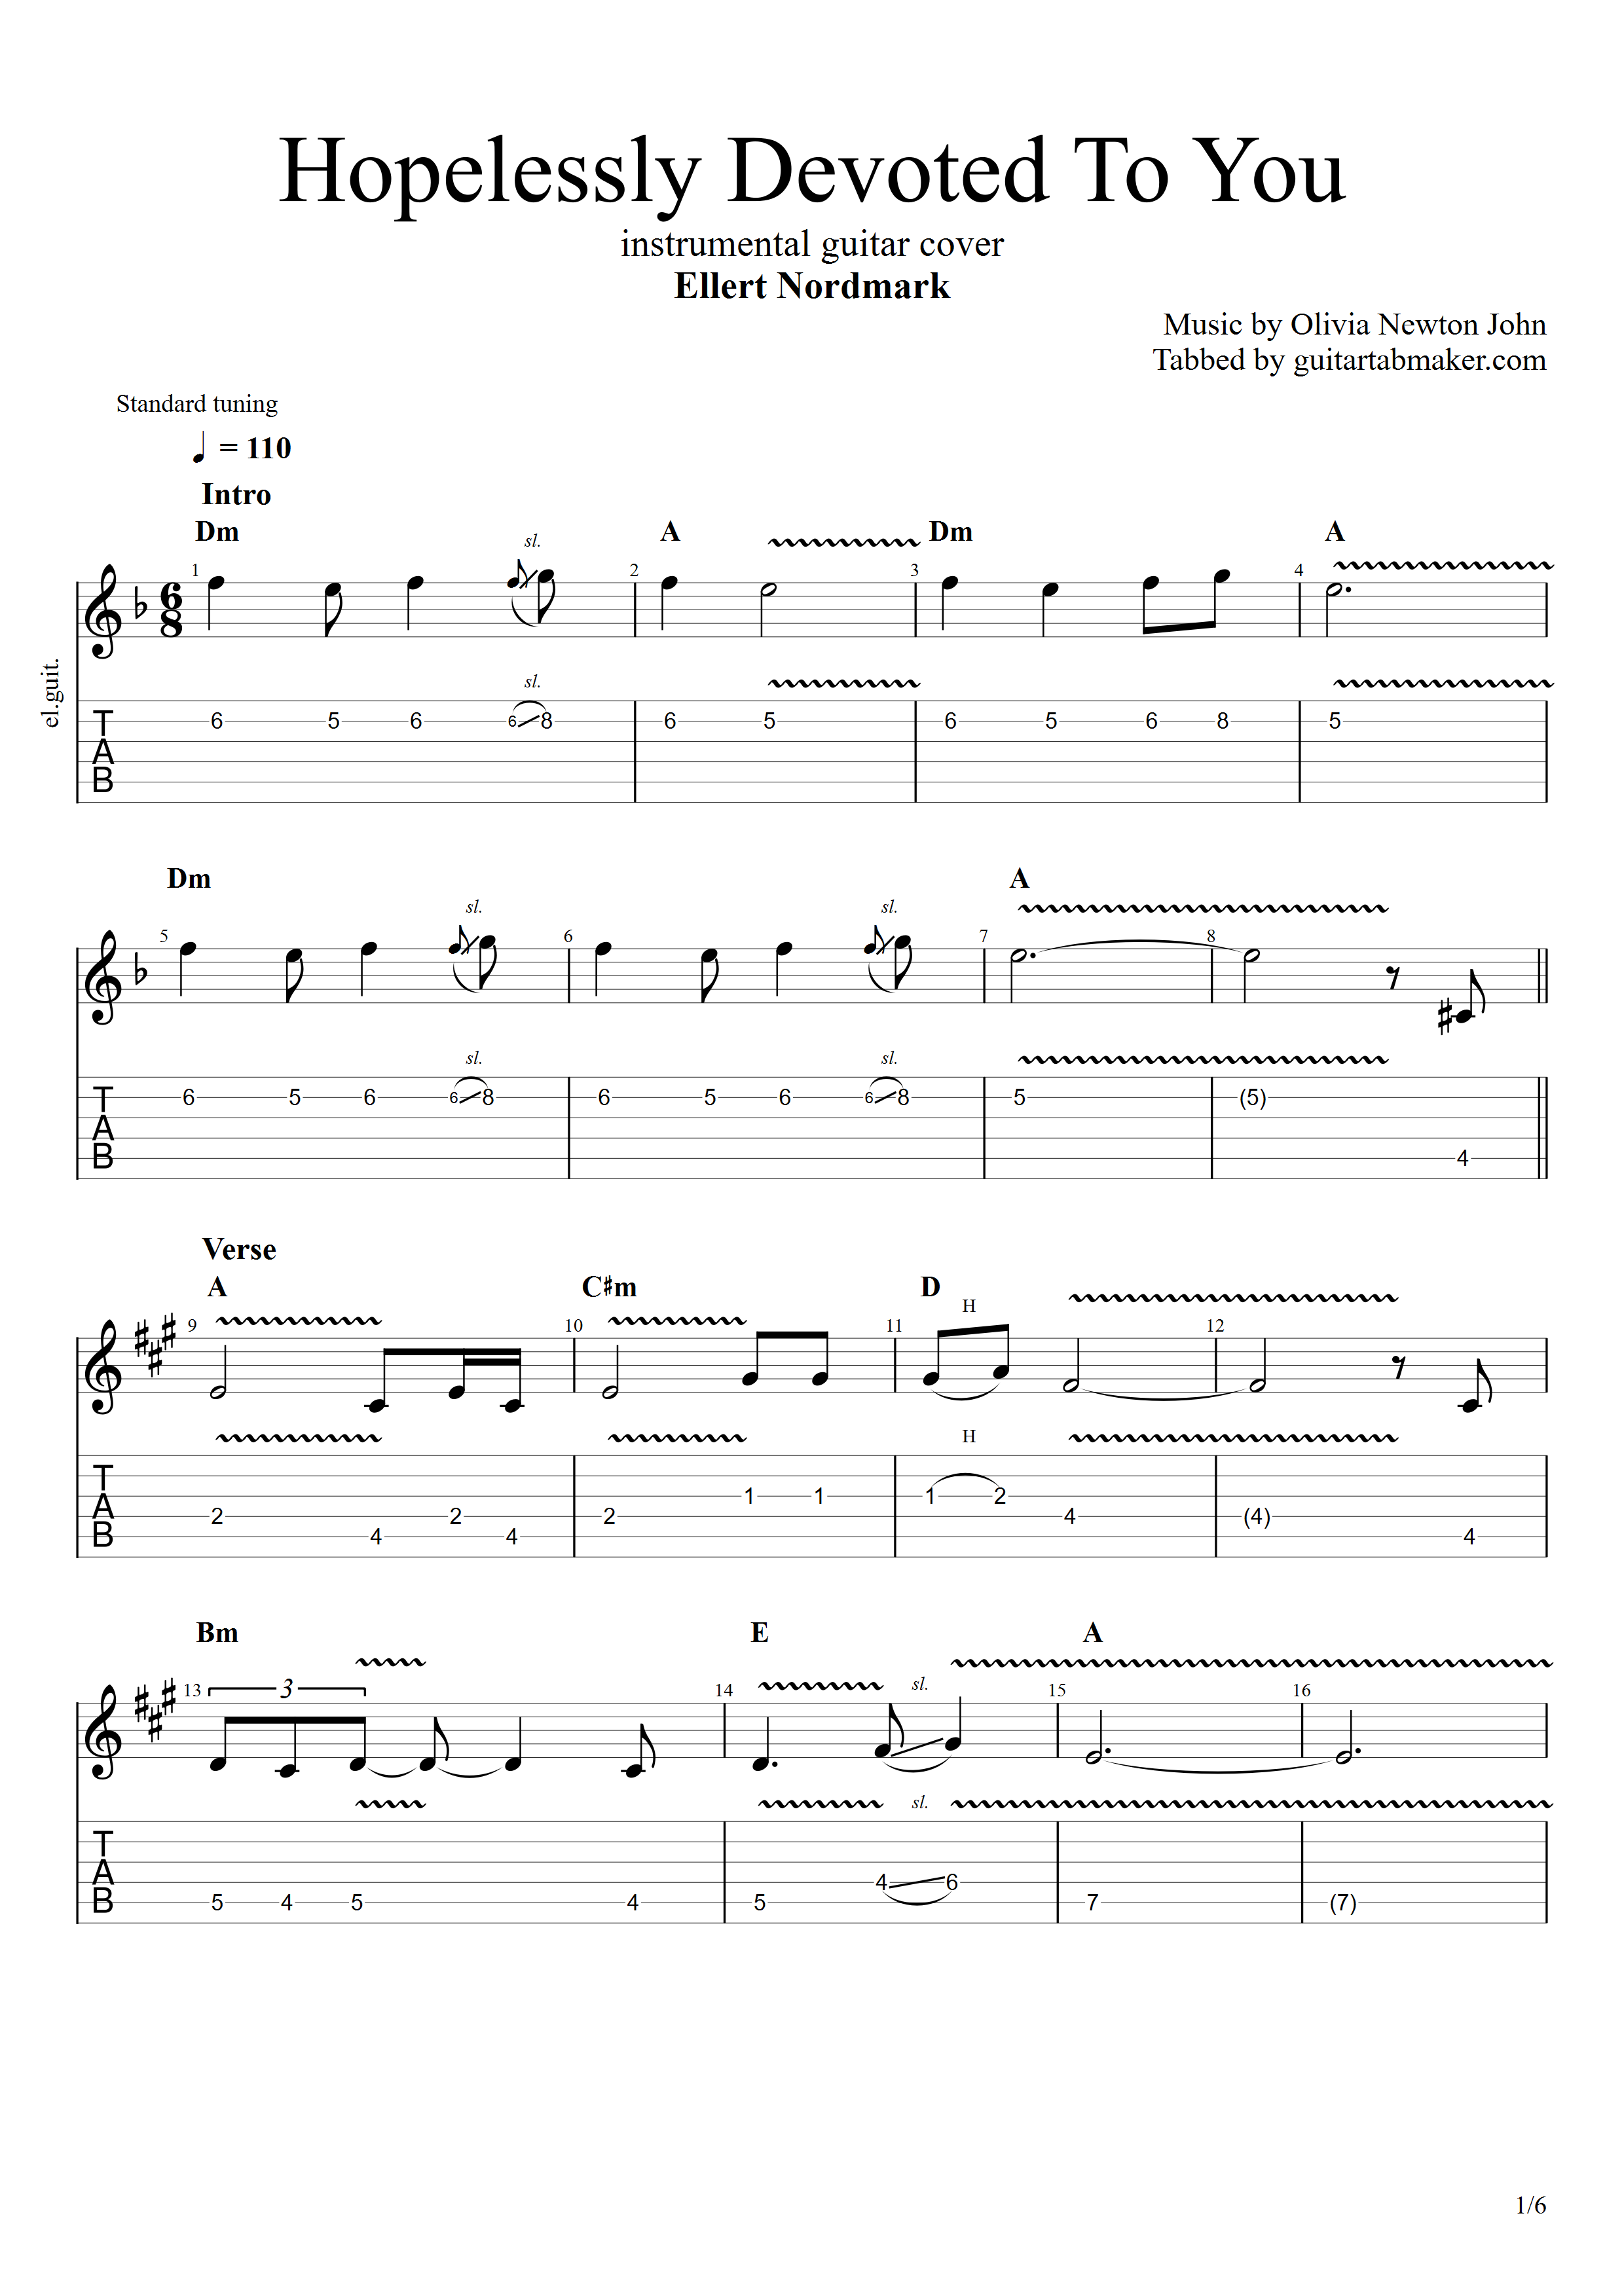 Hopelessly  Devoted To You instrumental guitar tab